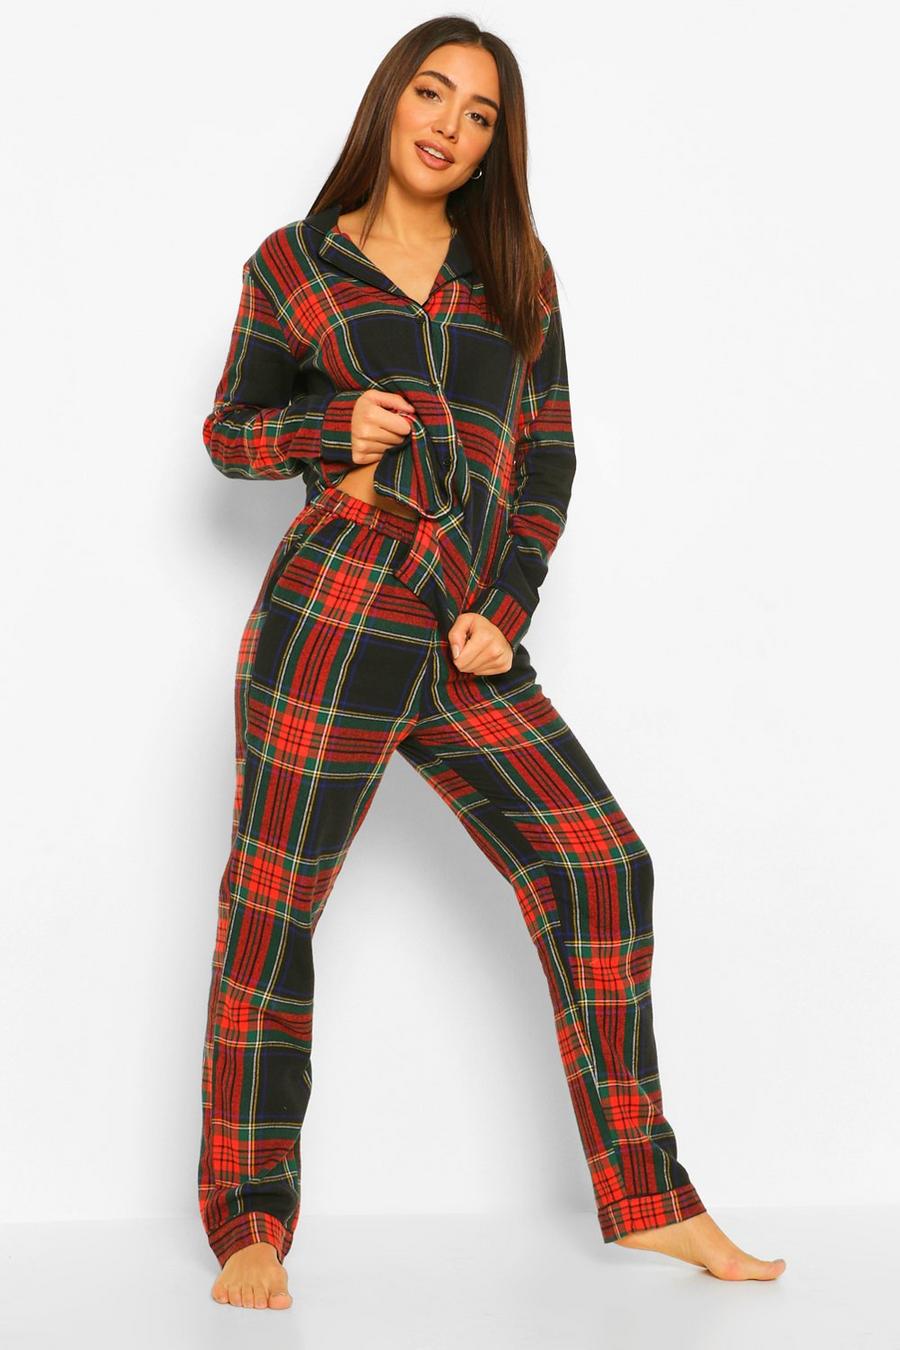 Red rouge Flannel Check Print Christmas Pyjamas Trouser Set